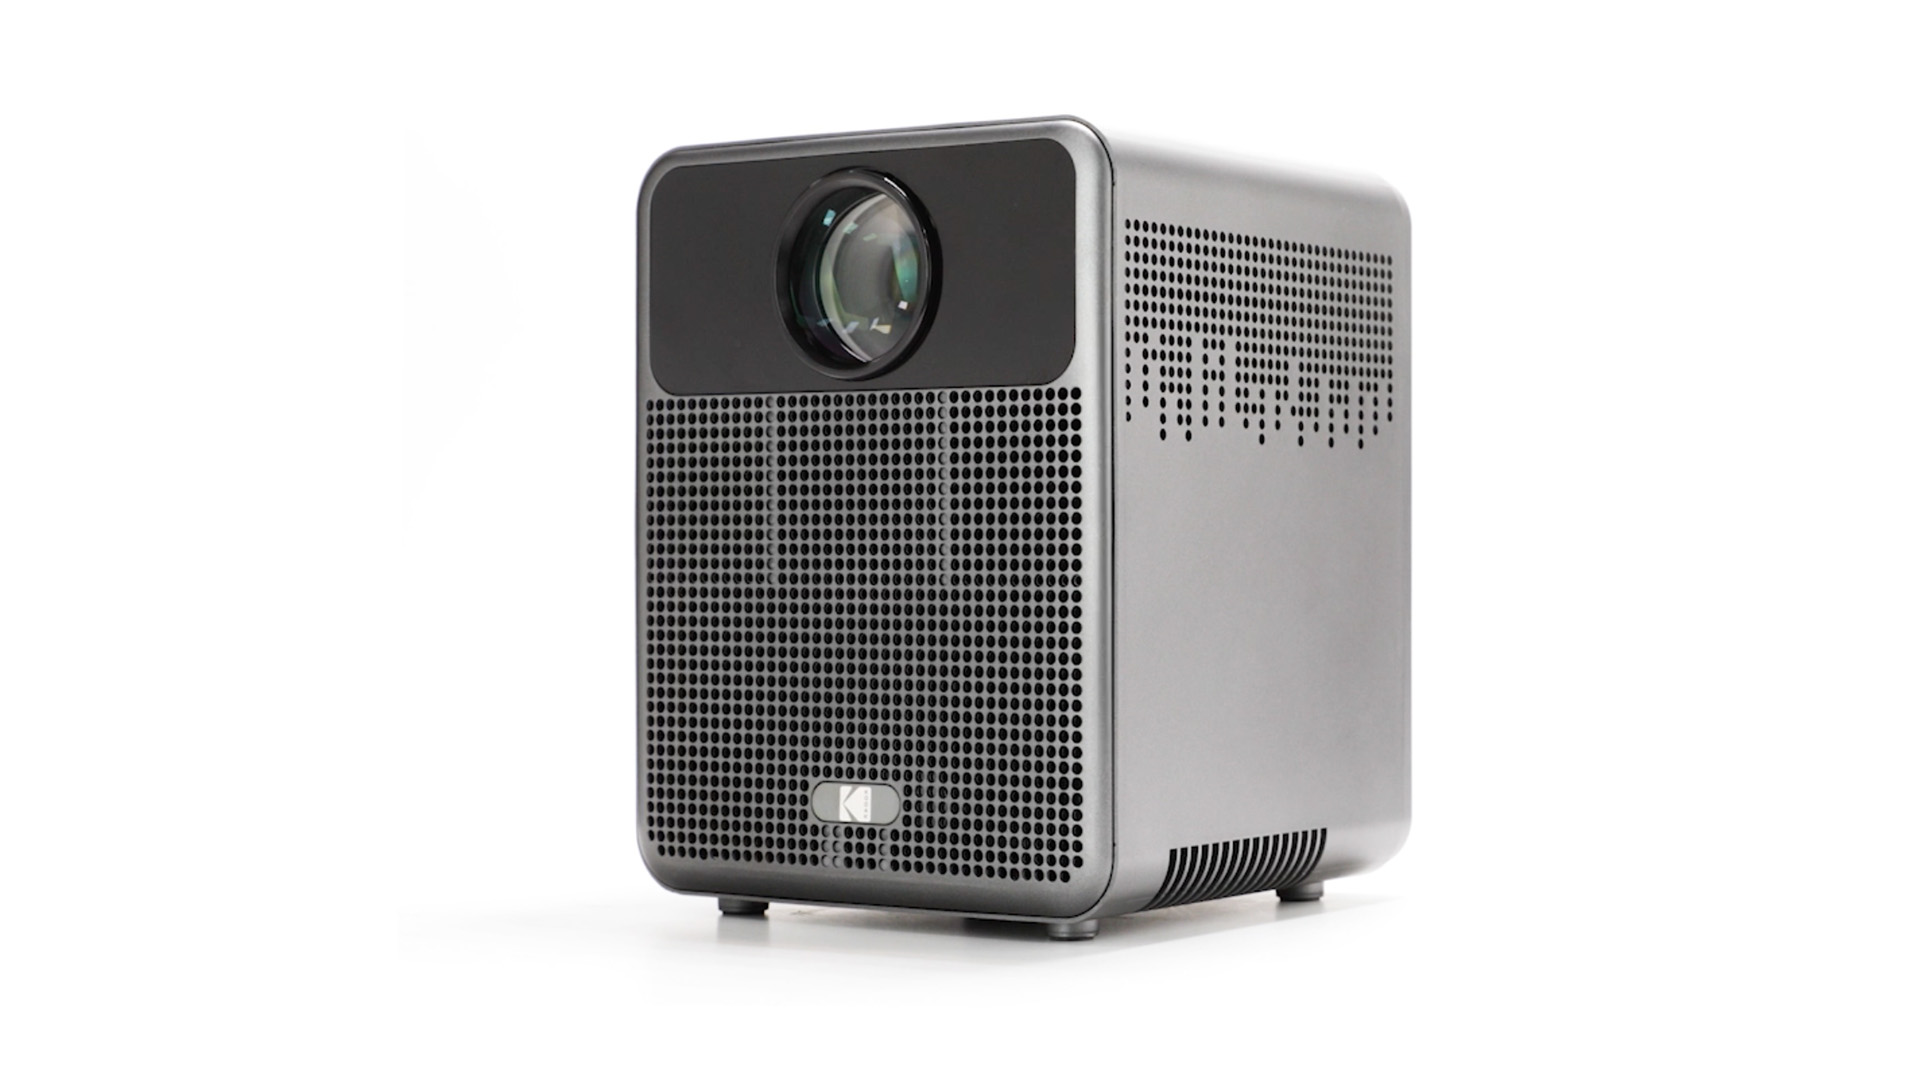 Best projector for dads and grads